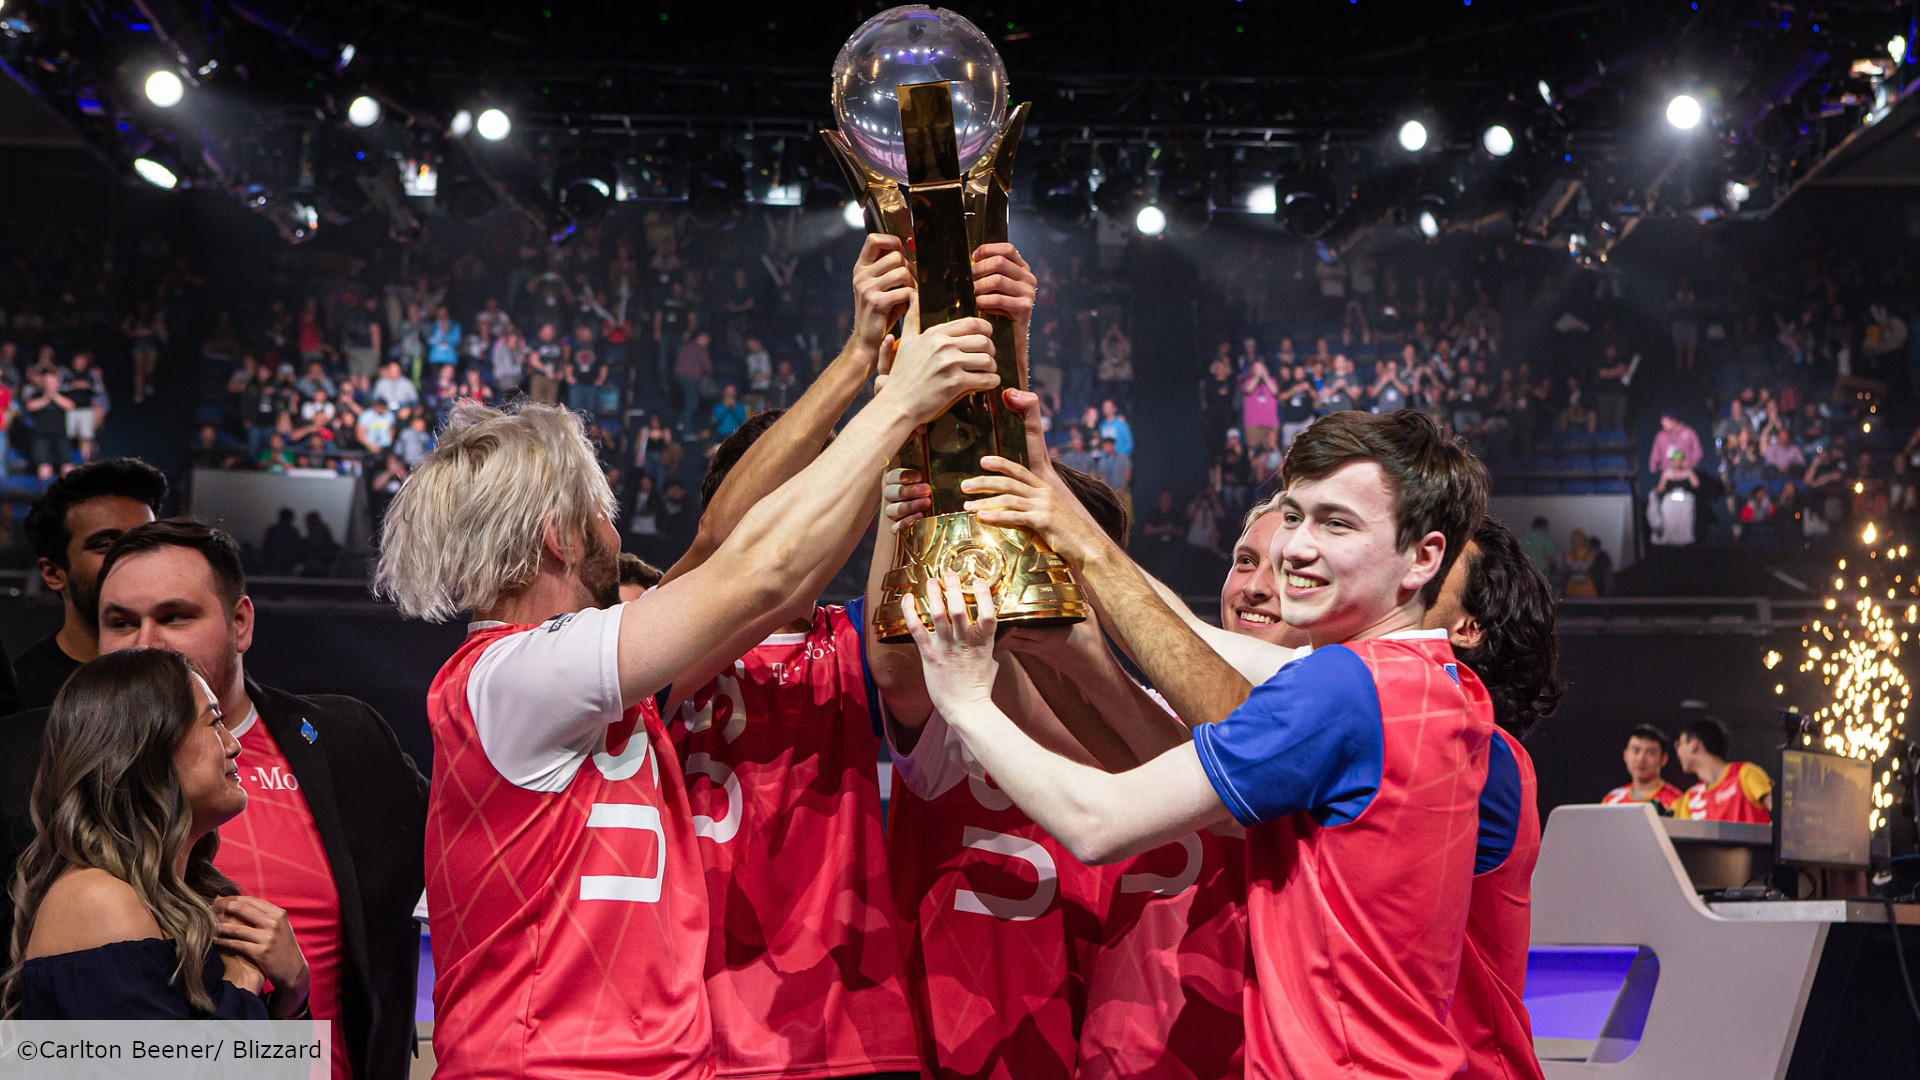 Overwatch World Cup dates, teams, prize pool, and how to watch The Loadout